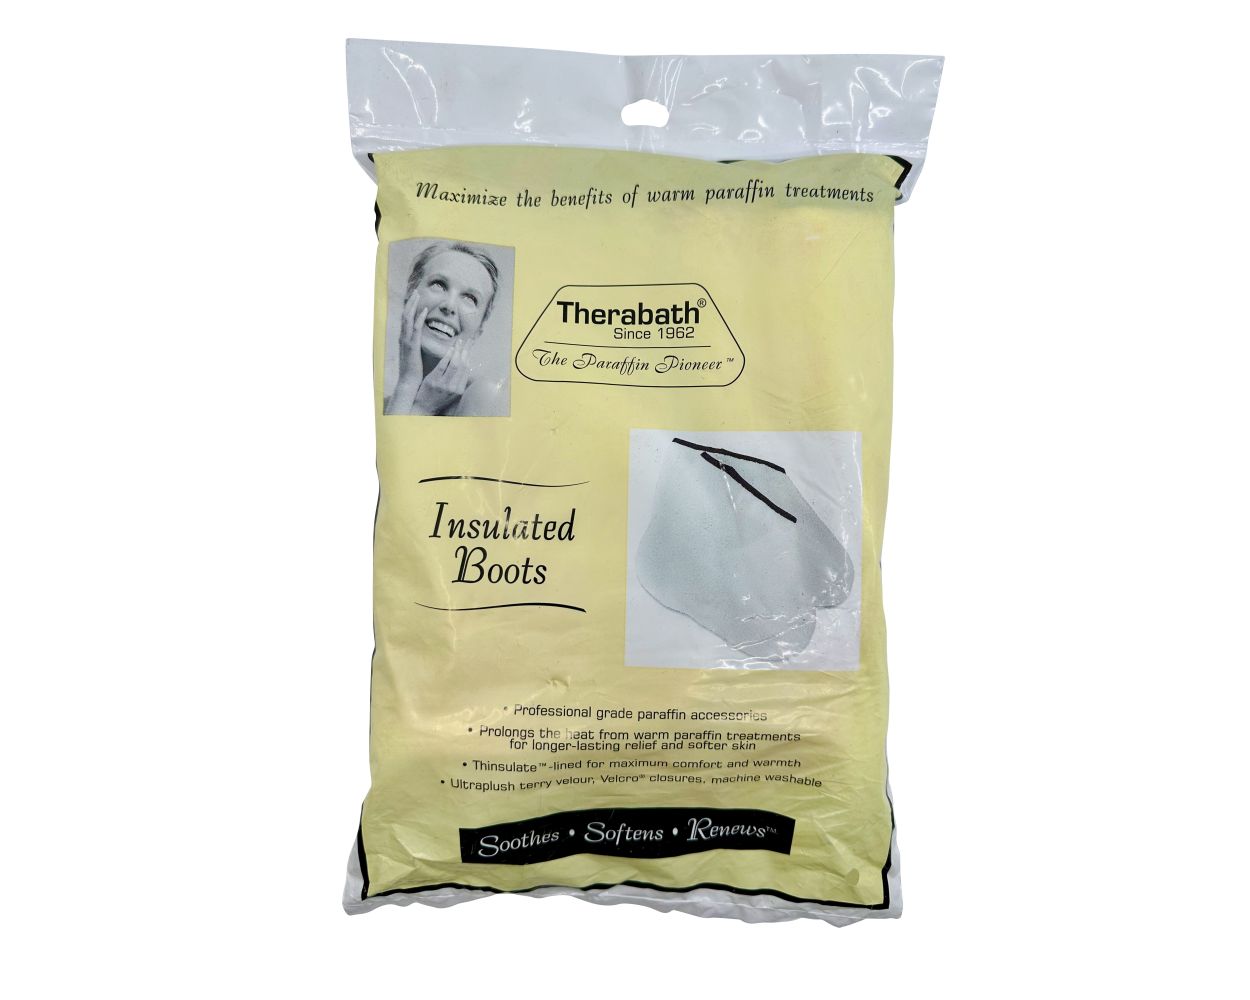 Paraffin Facial Treatment Kit - Therabath Paraffin Products